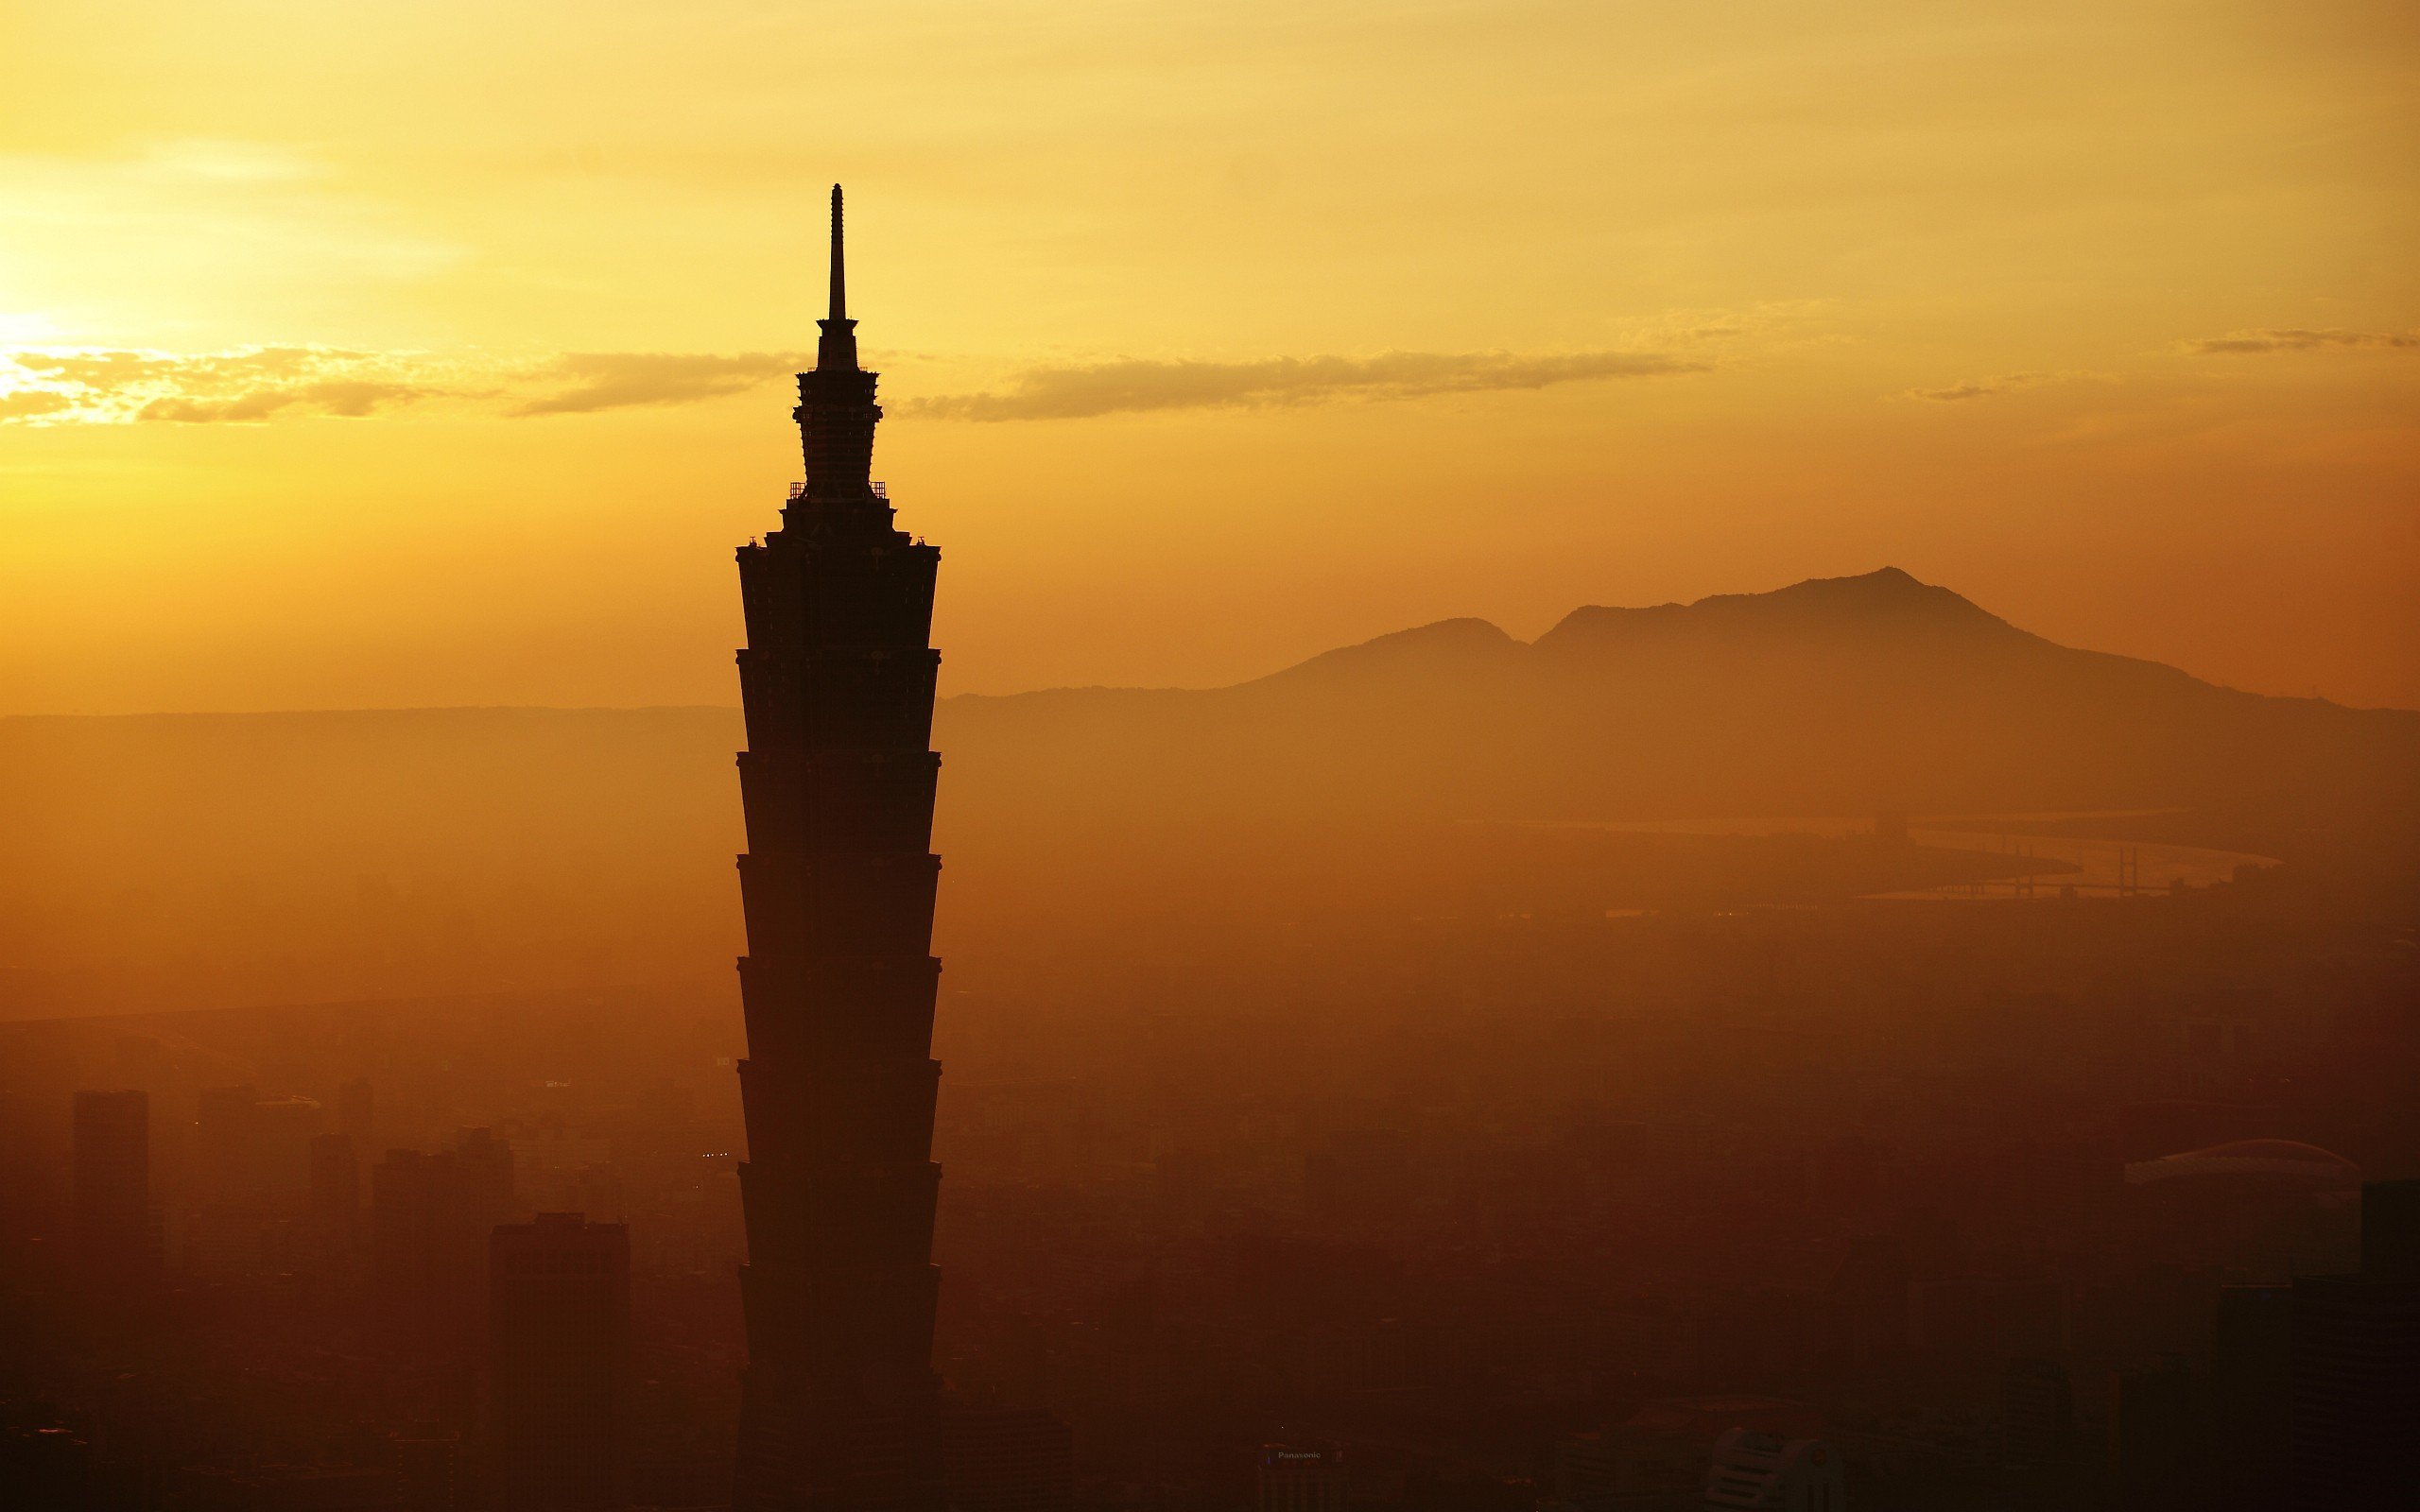 Taipei 101 Pictures  Download Free Images on Unsplash